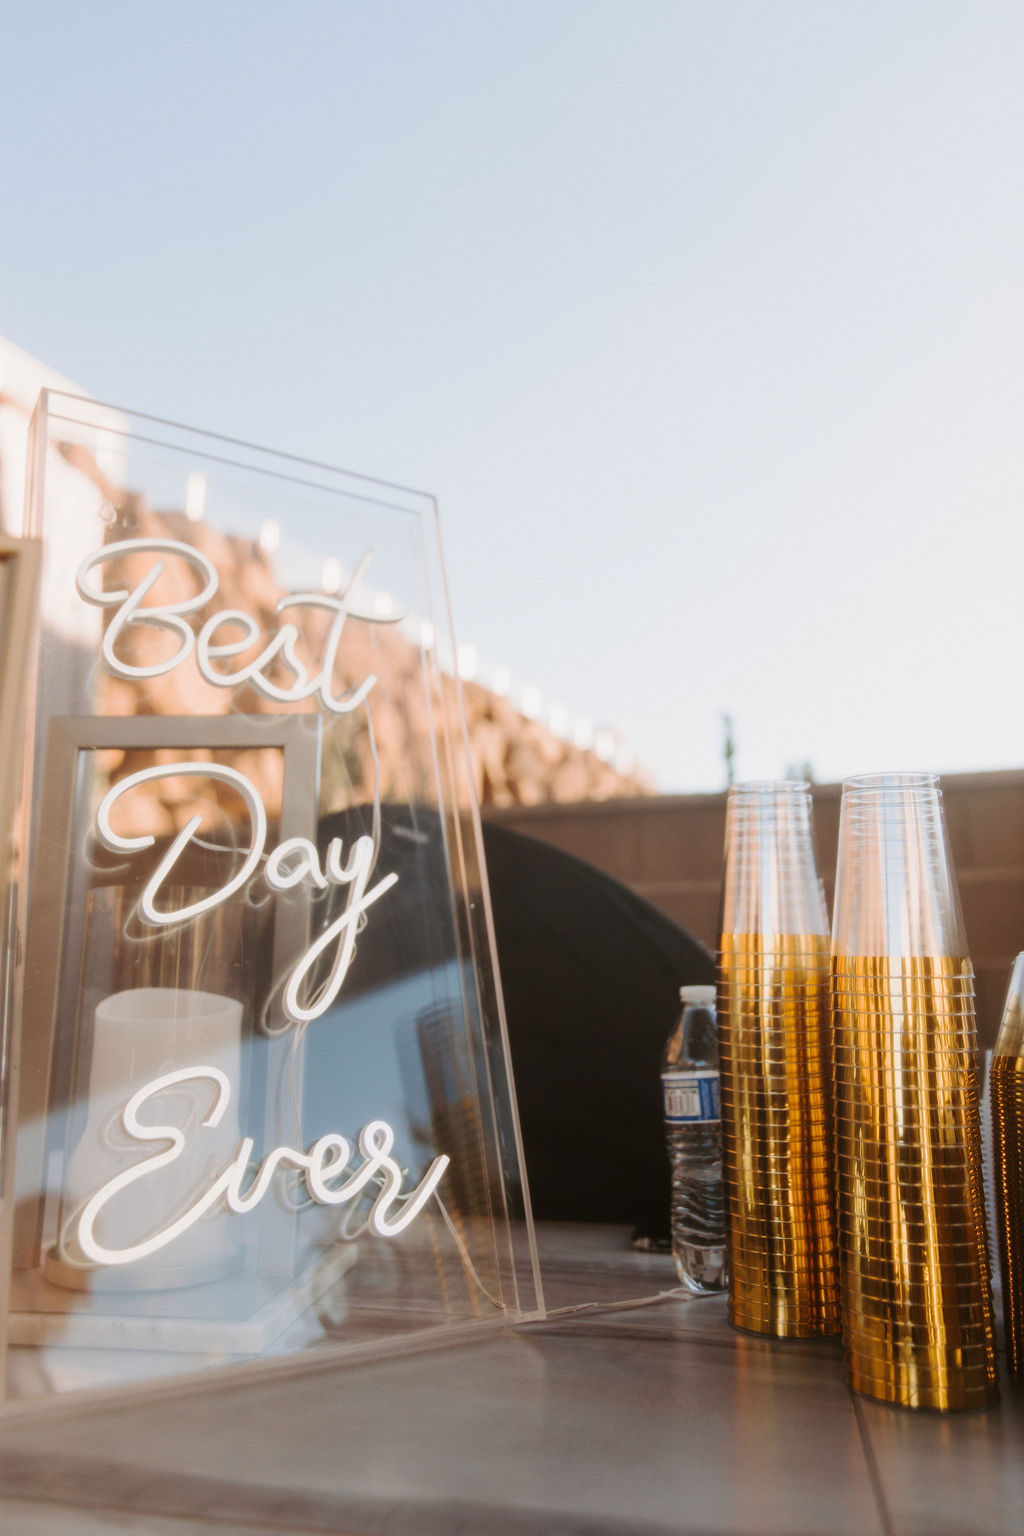 Neon Best Day Ever sign for Wedding Bar Decor 